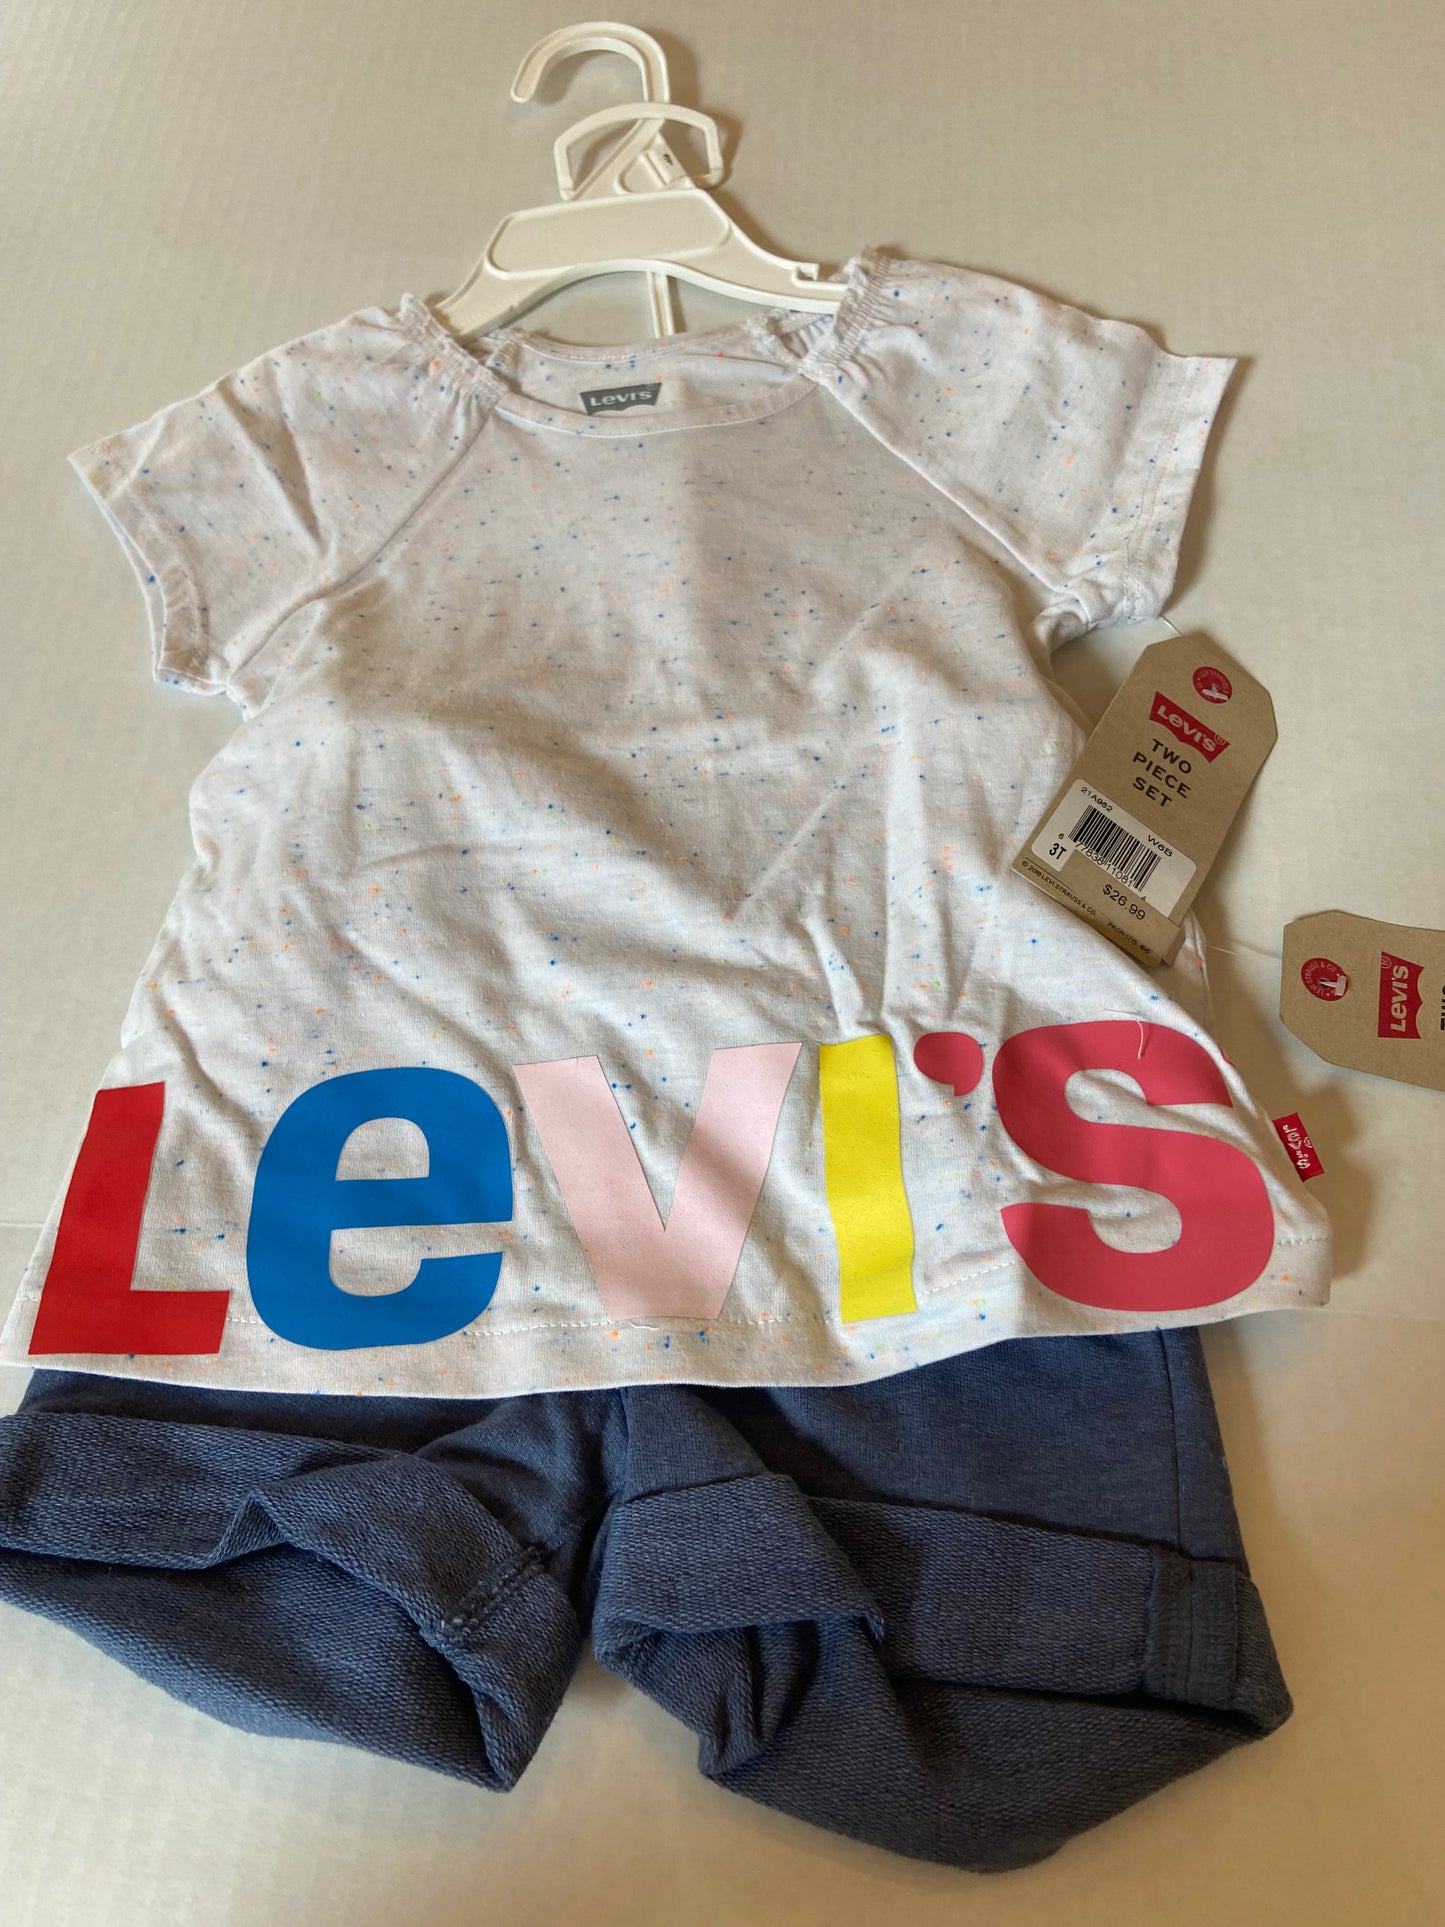 2T NWT, Levi's short outfit